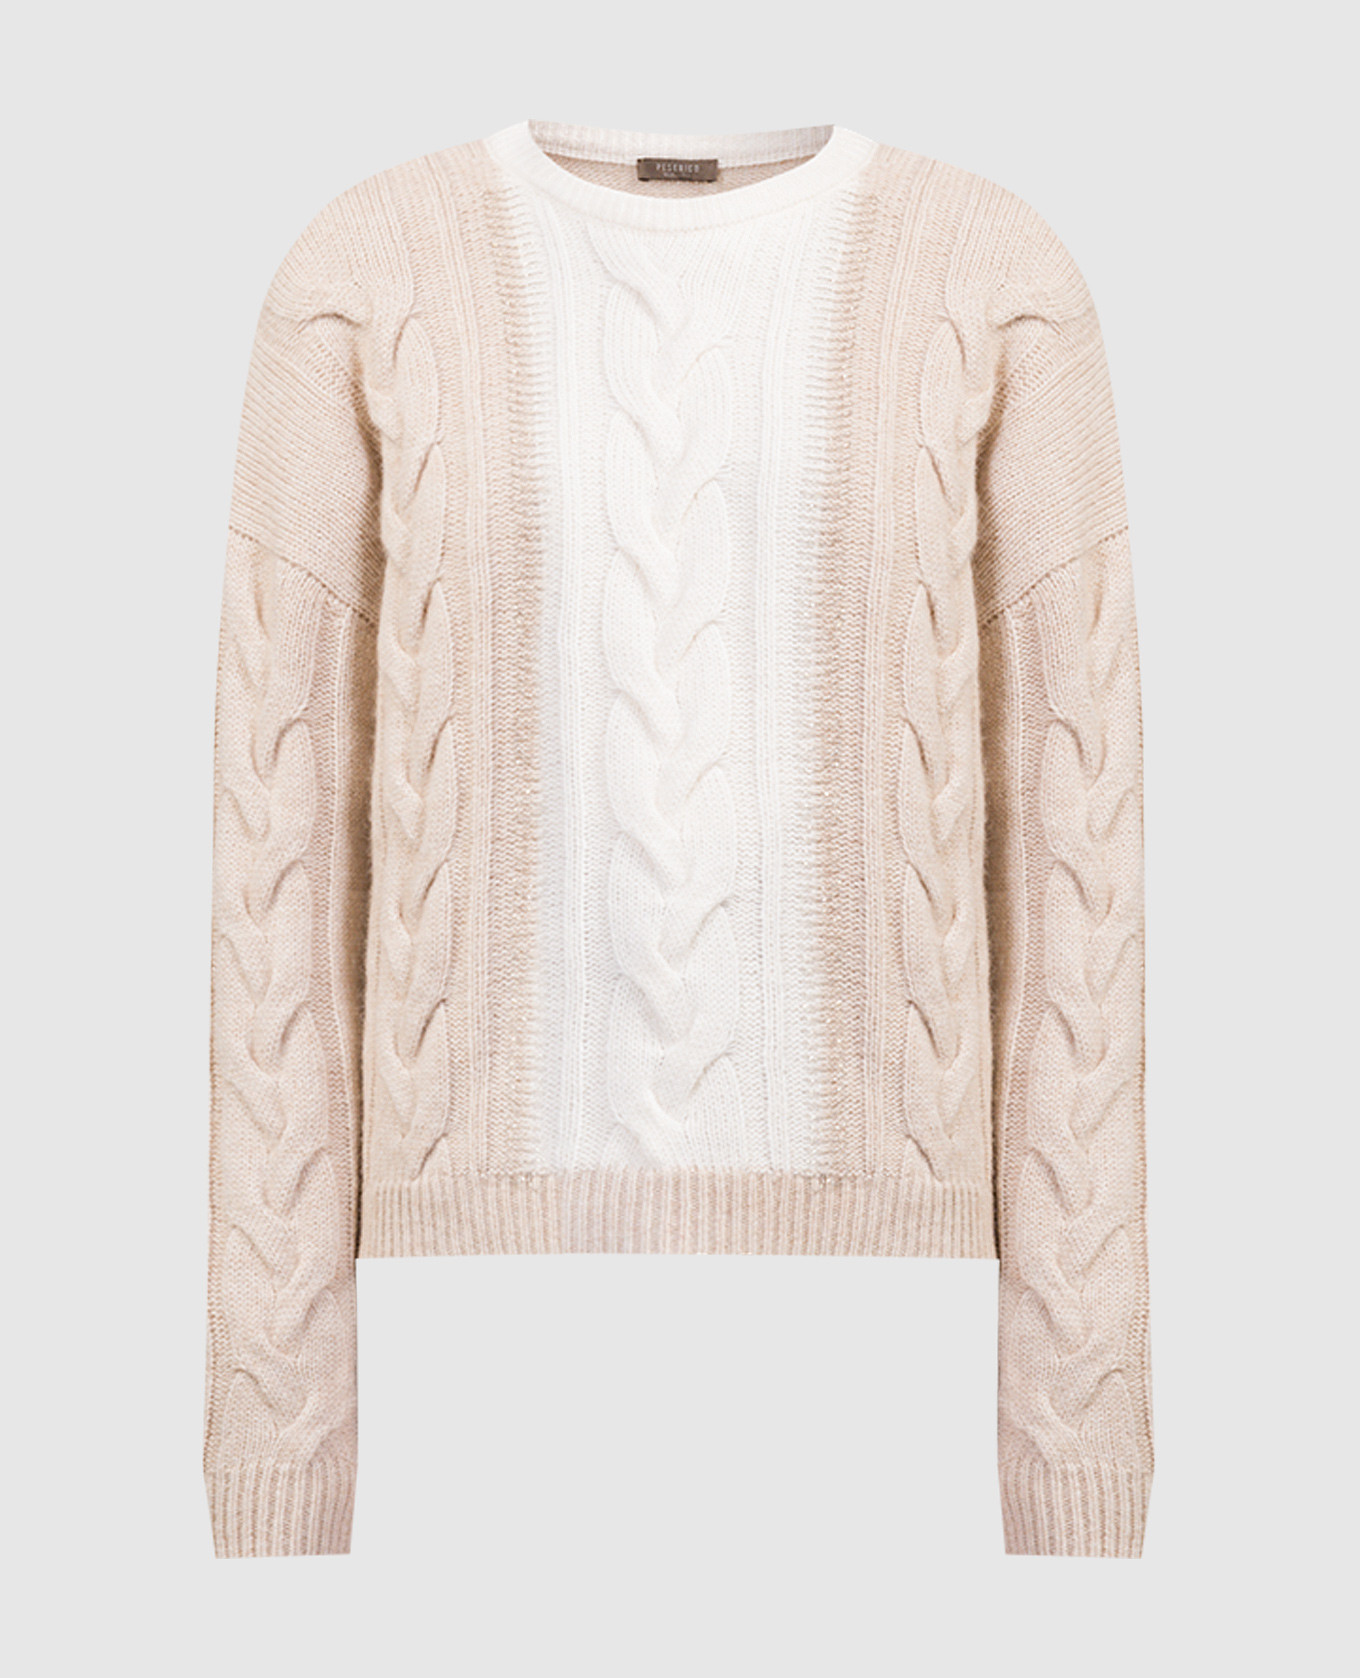 Beige sweater in a textured pattern with a monil chain